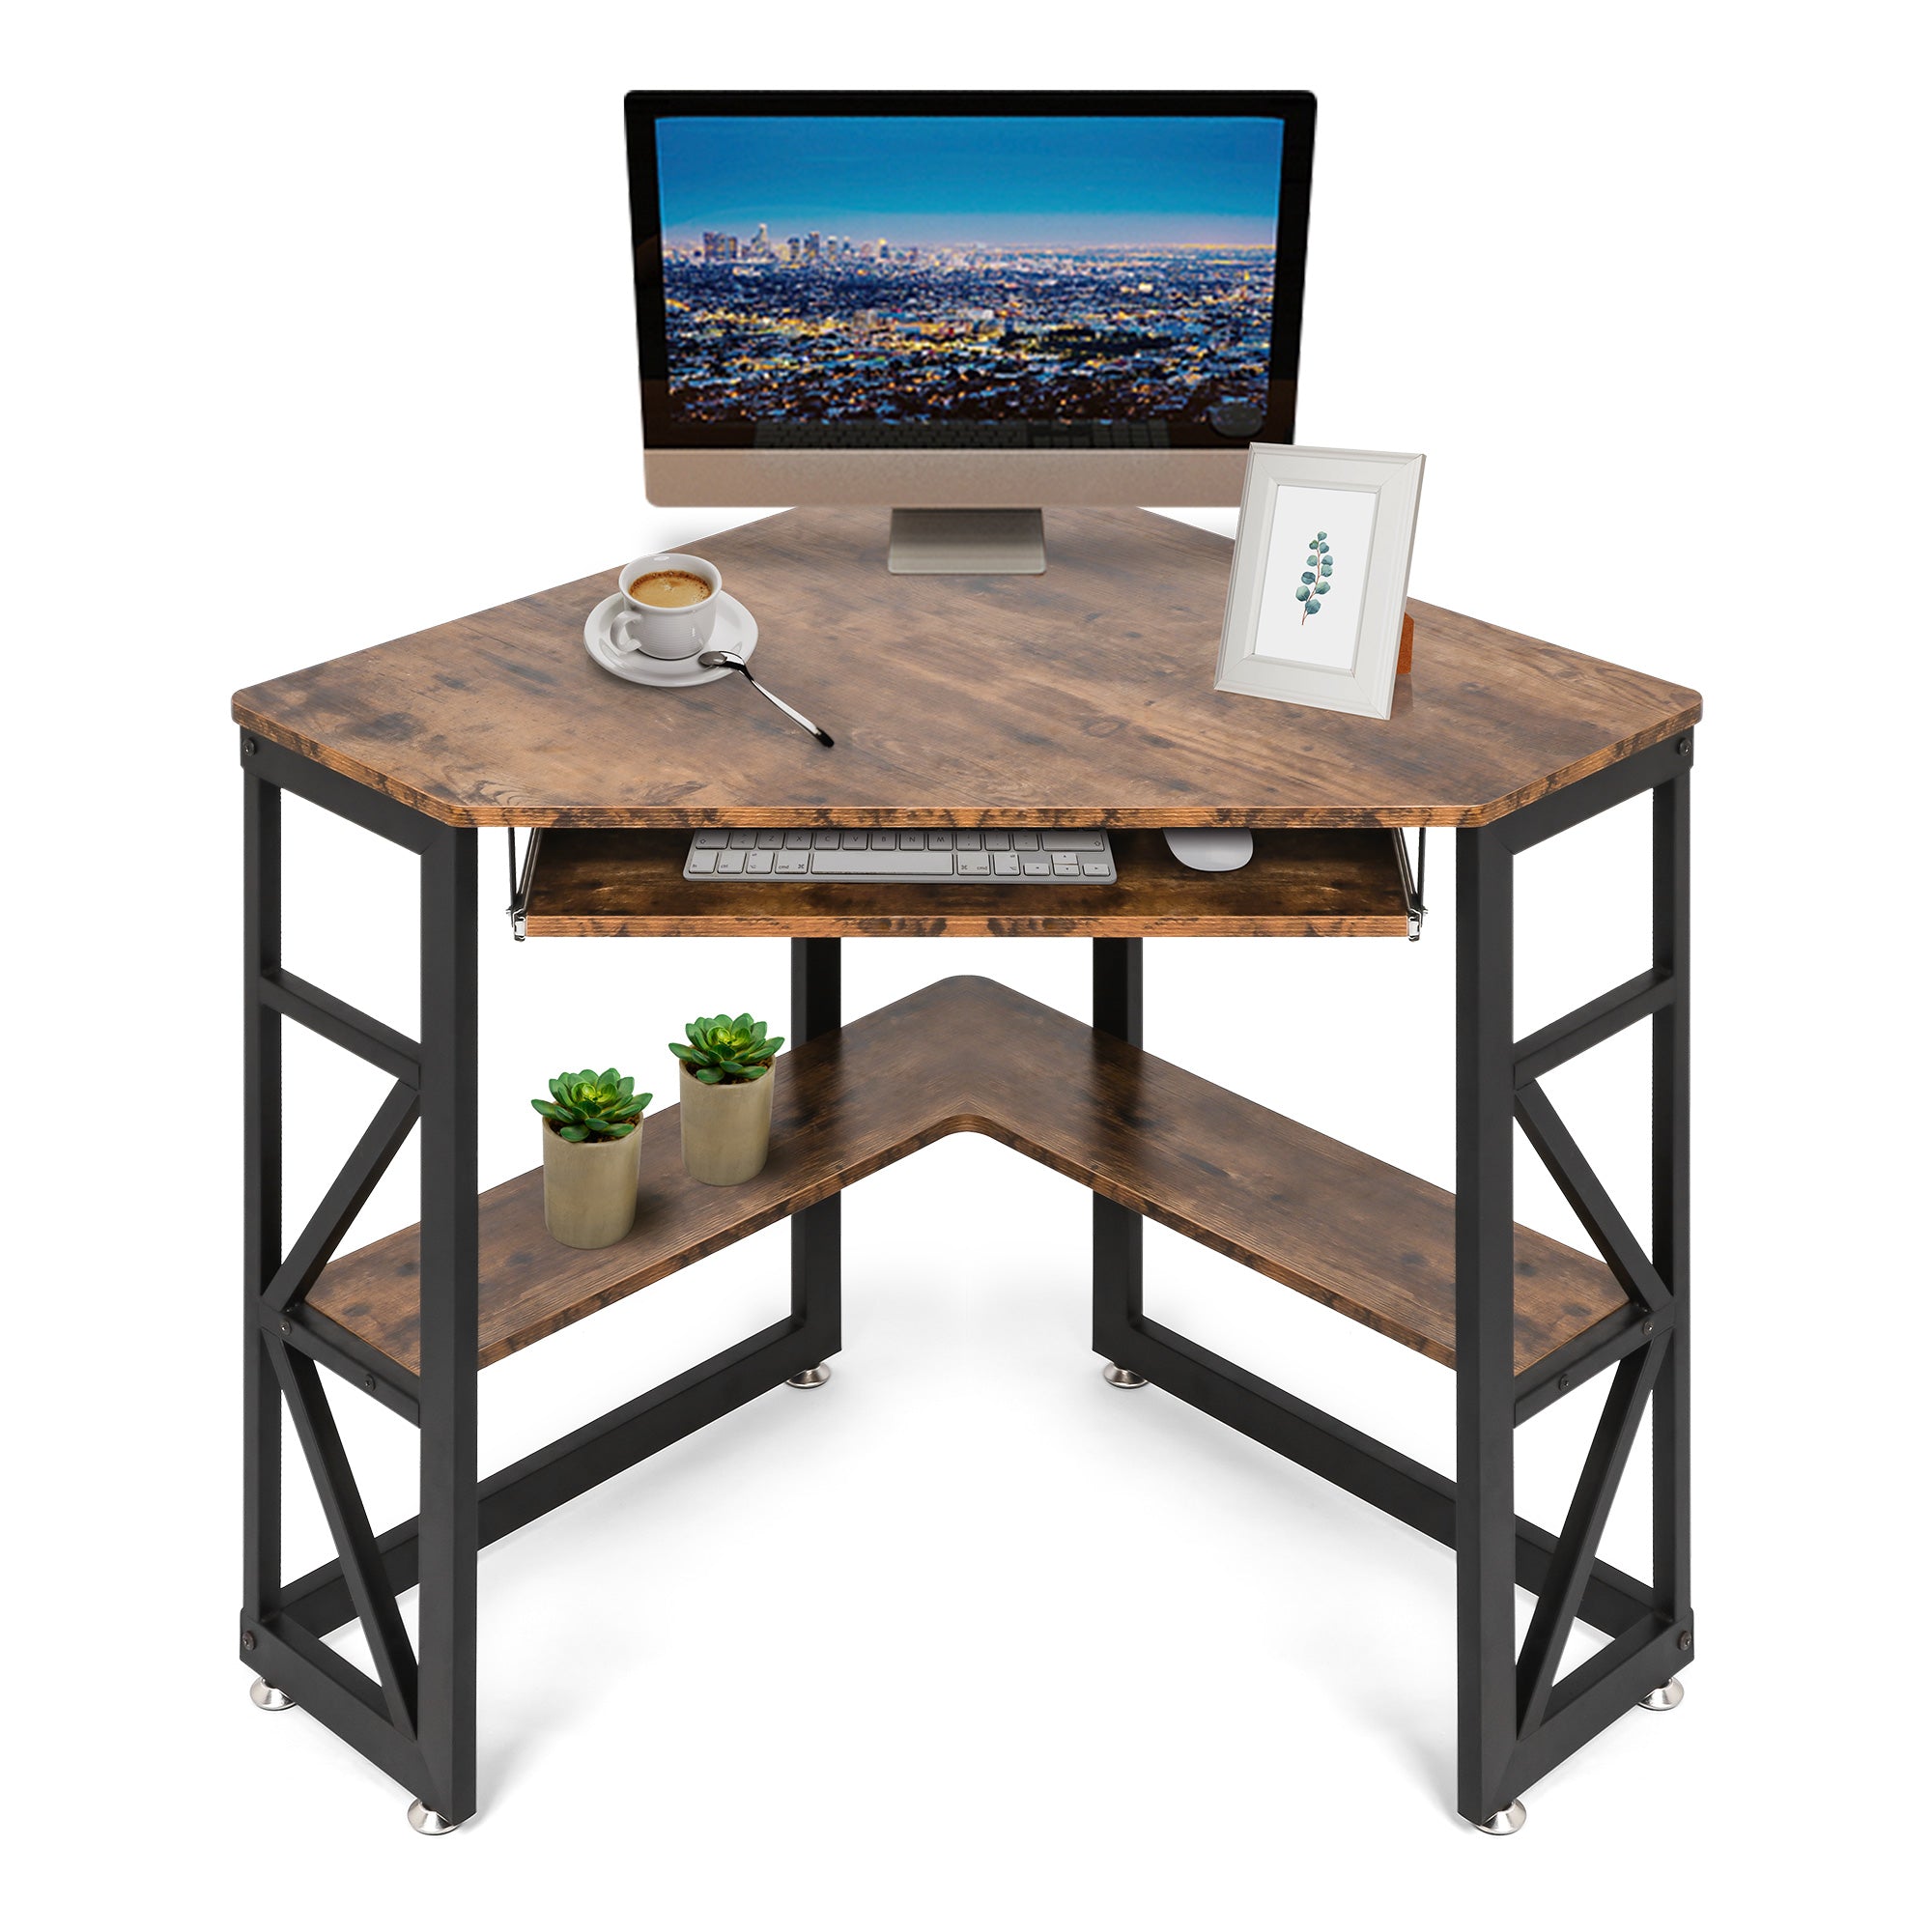 Corner Desk for Small Space Home Office Computer Desk Writing Table with Storage Shelves and Bookshelf, Brown